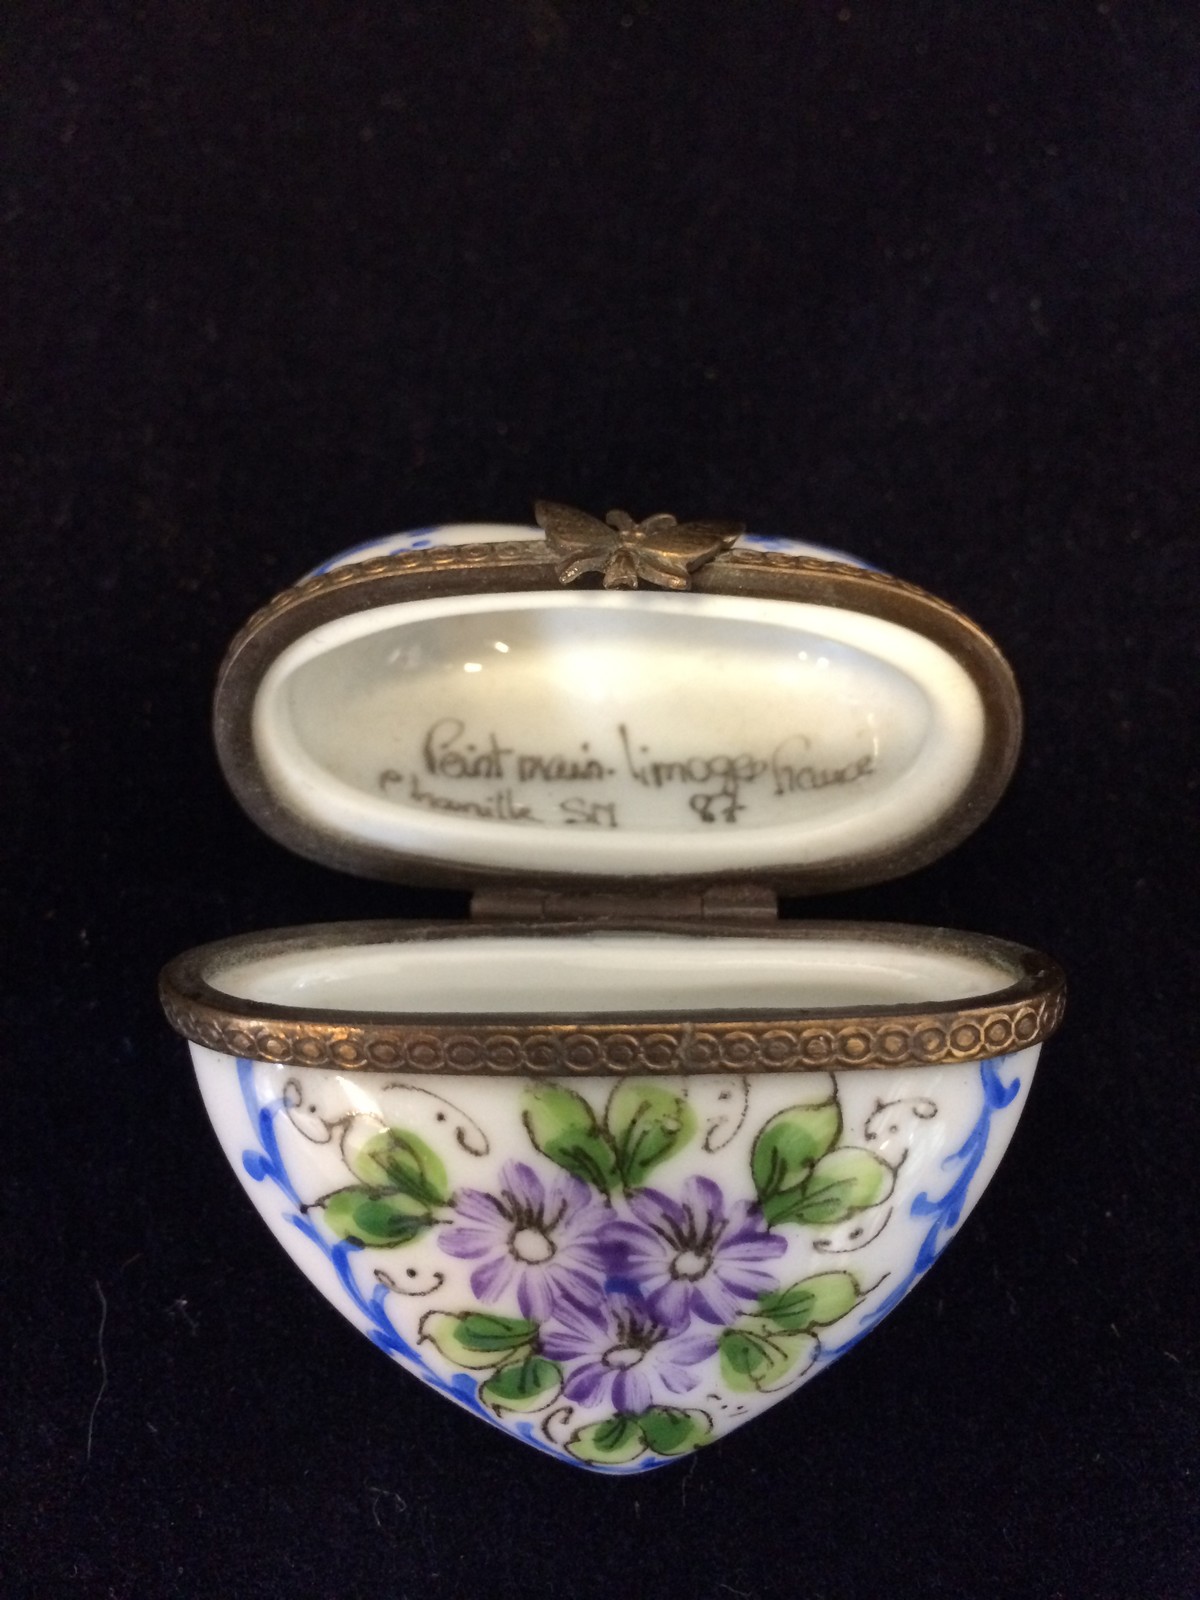 Blue and White floral box heart  with a butterfly clasp Peint Main Limoges France 87 - Image 2 of 3